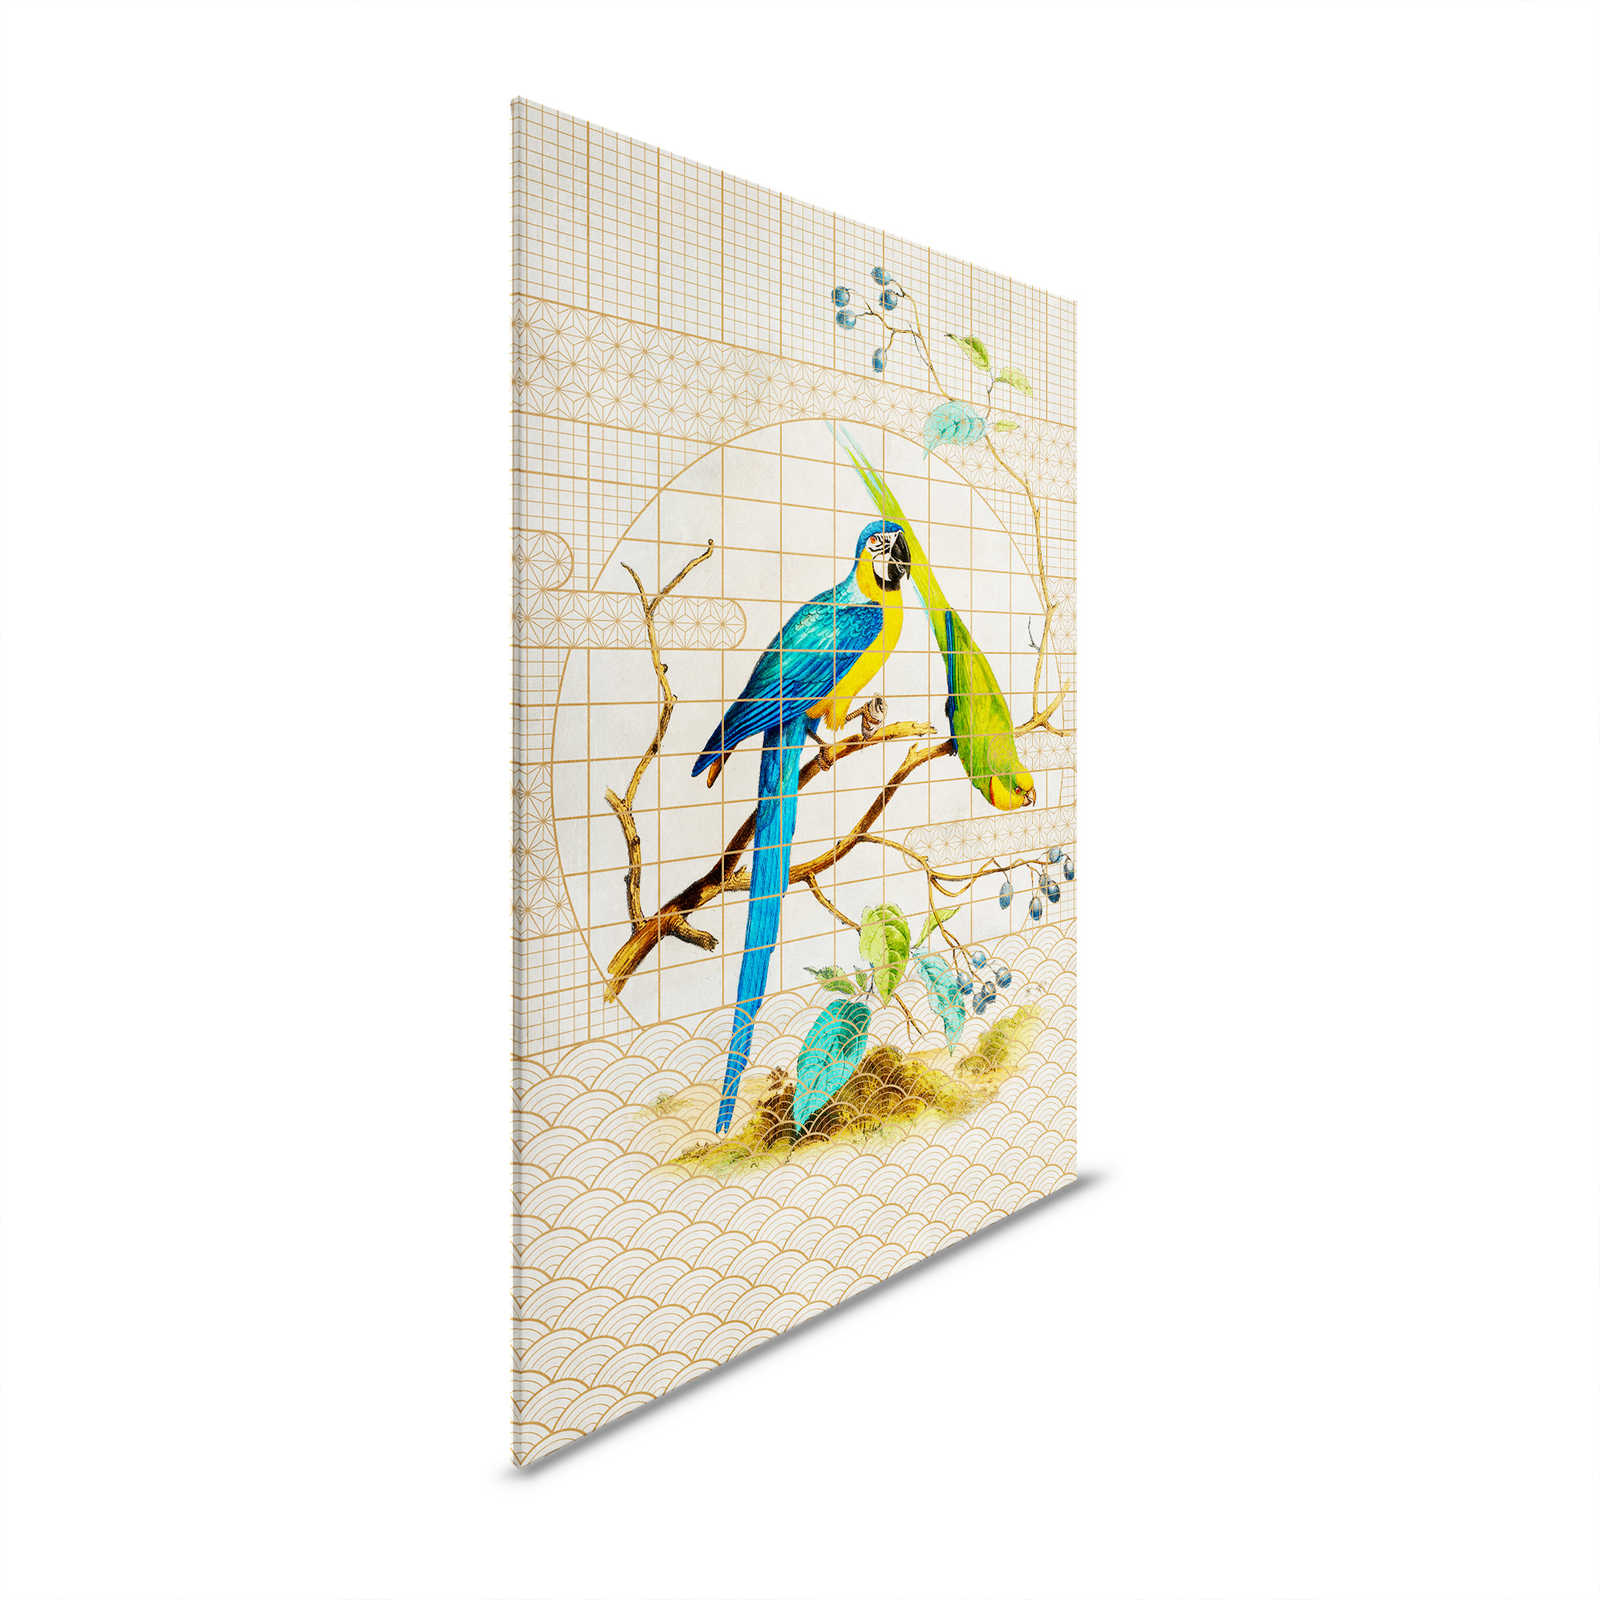 Aviary 3 - Vintage Style Parrot & Golden Pattern Canvas Painting - 1.20 m x 0.80 m
